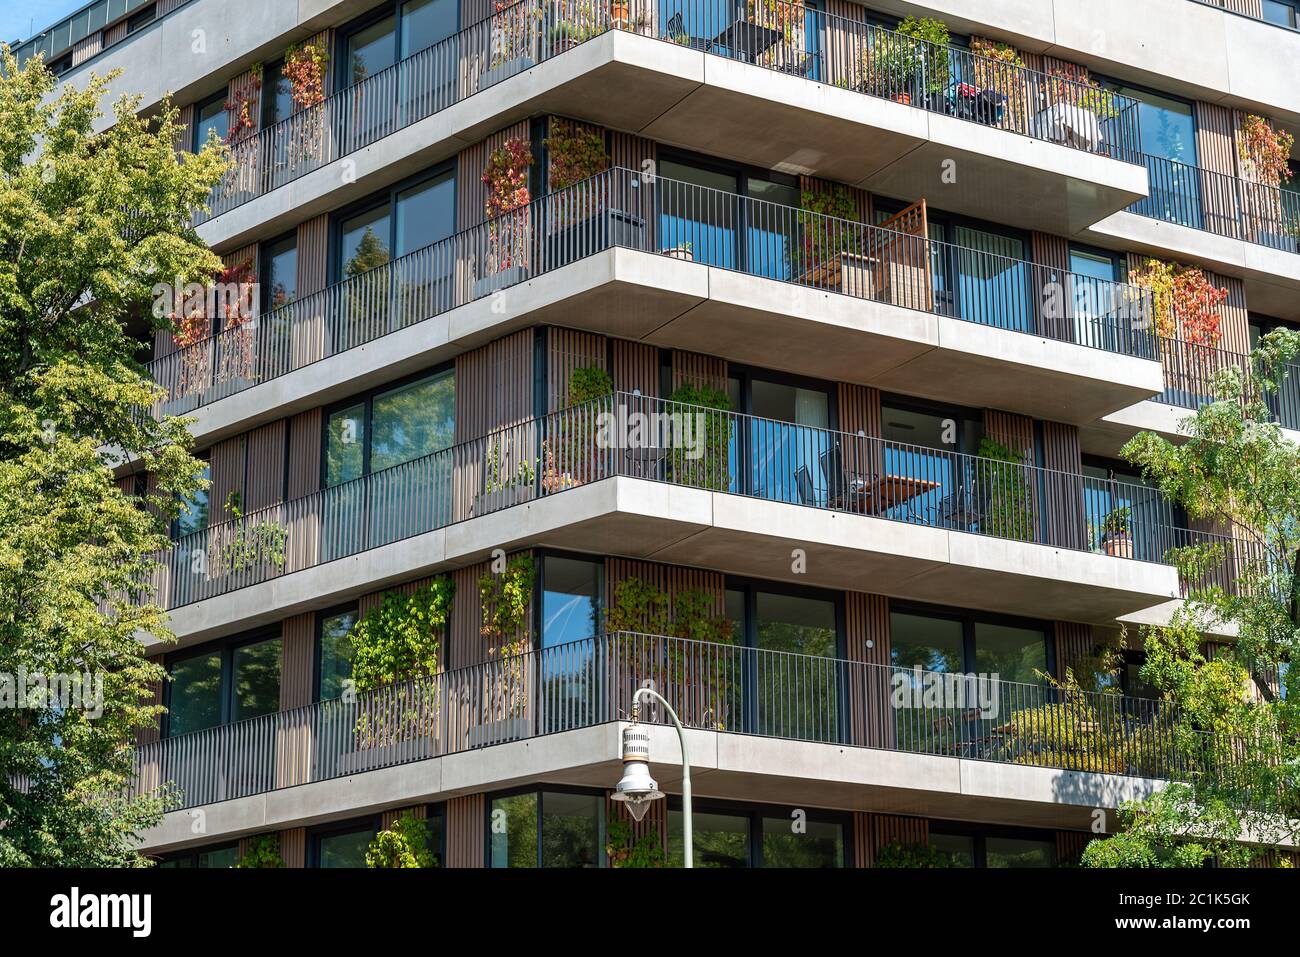 Facade of a new apartment house with big balconies Stock Photo